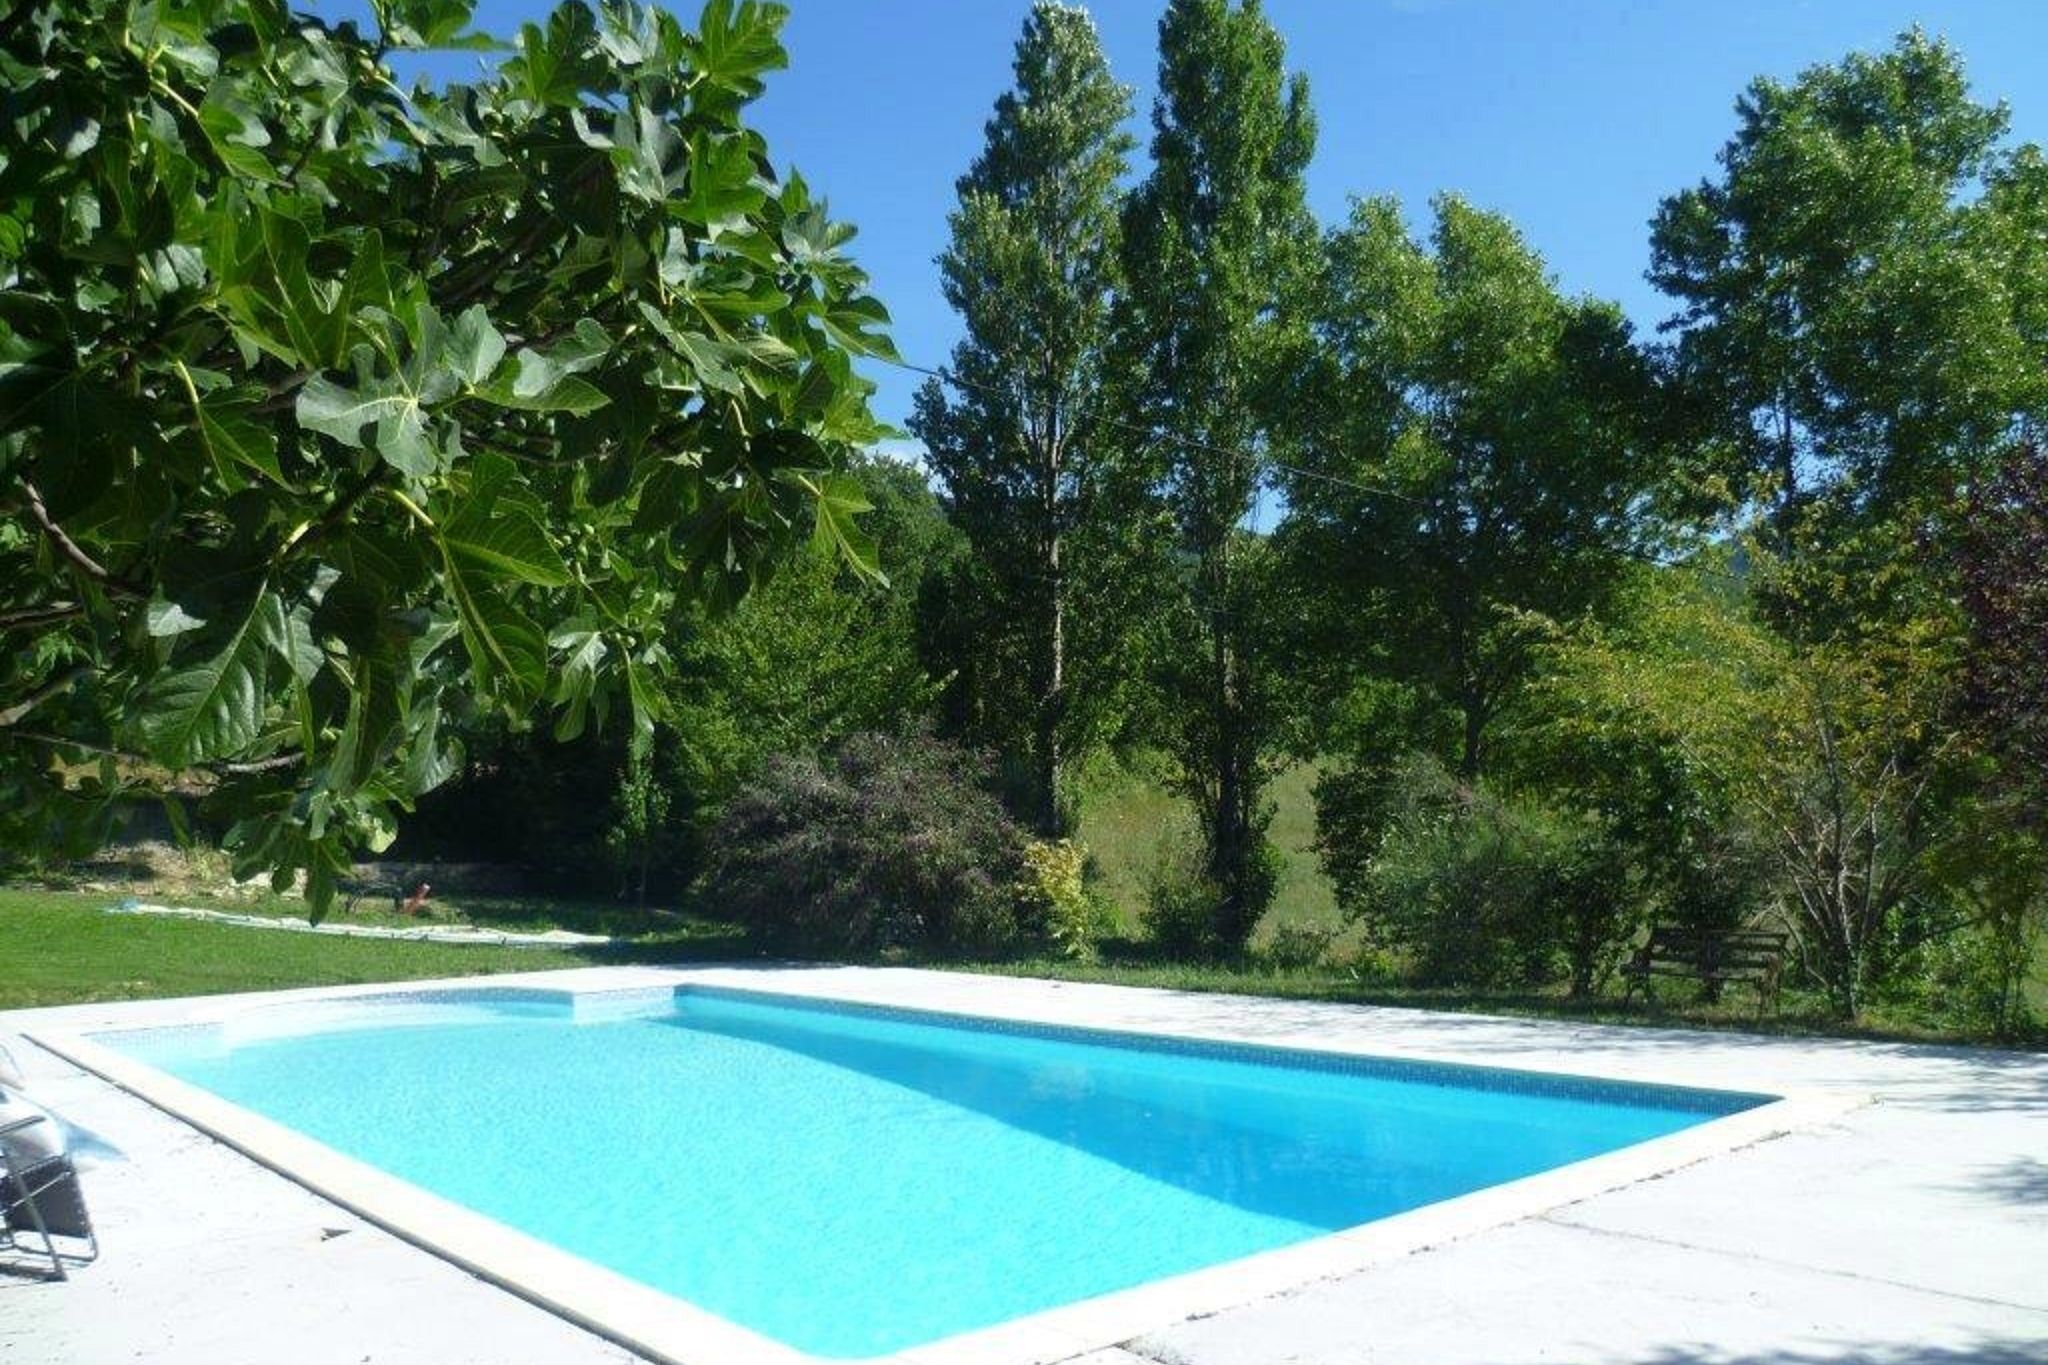 Characteristic appartement with swimming pool, completely renovated